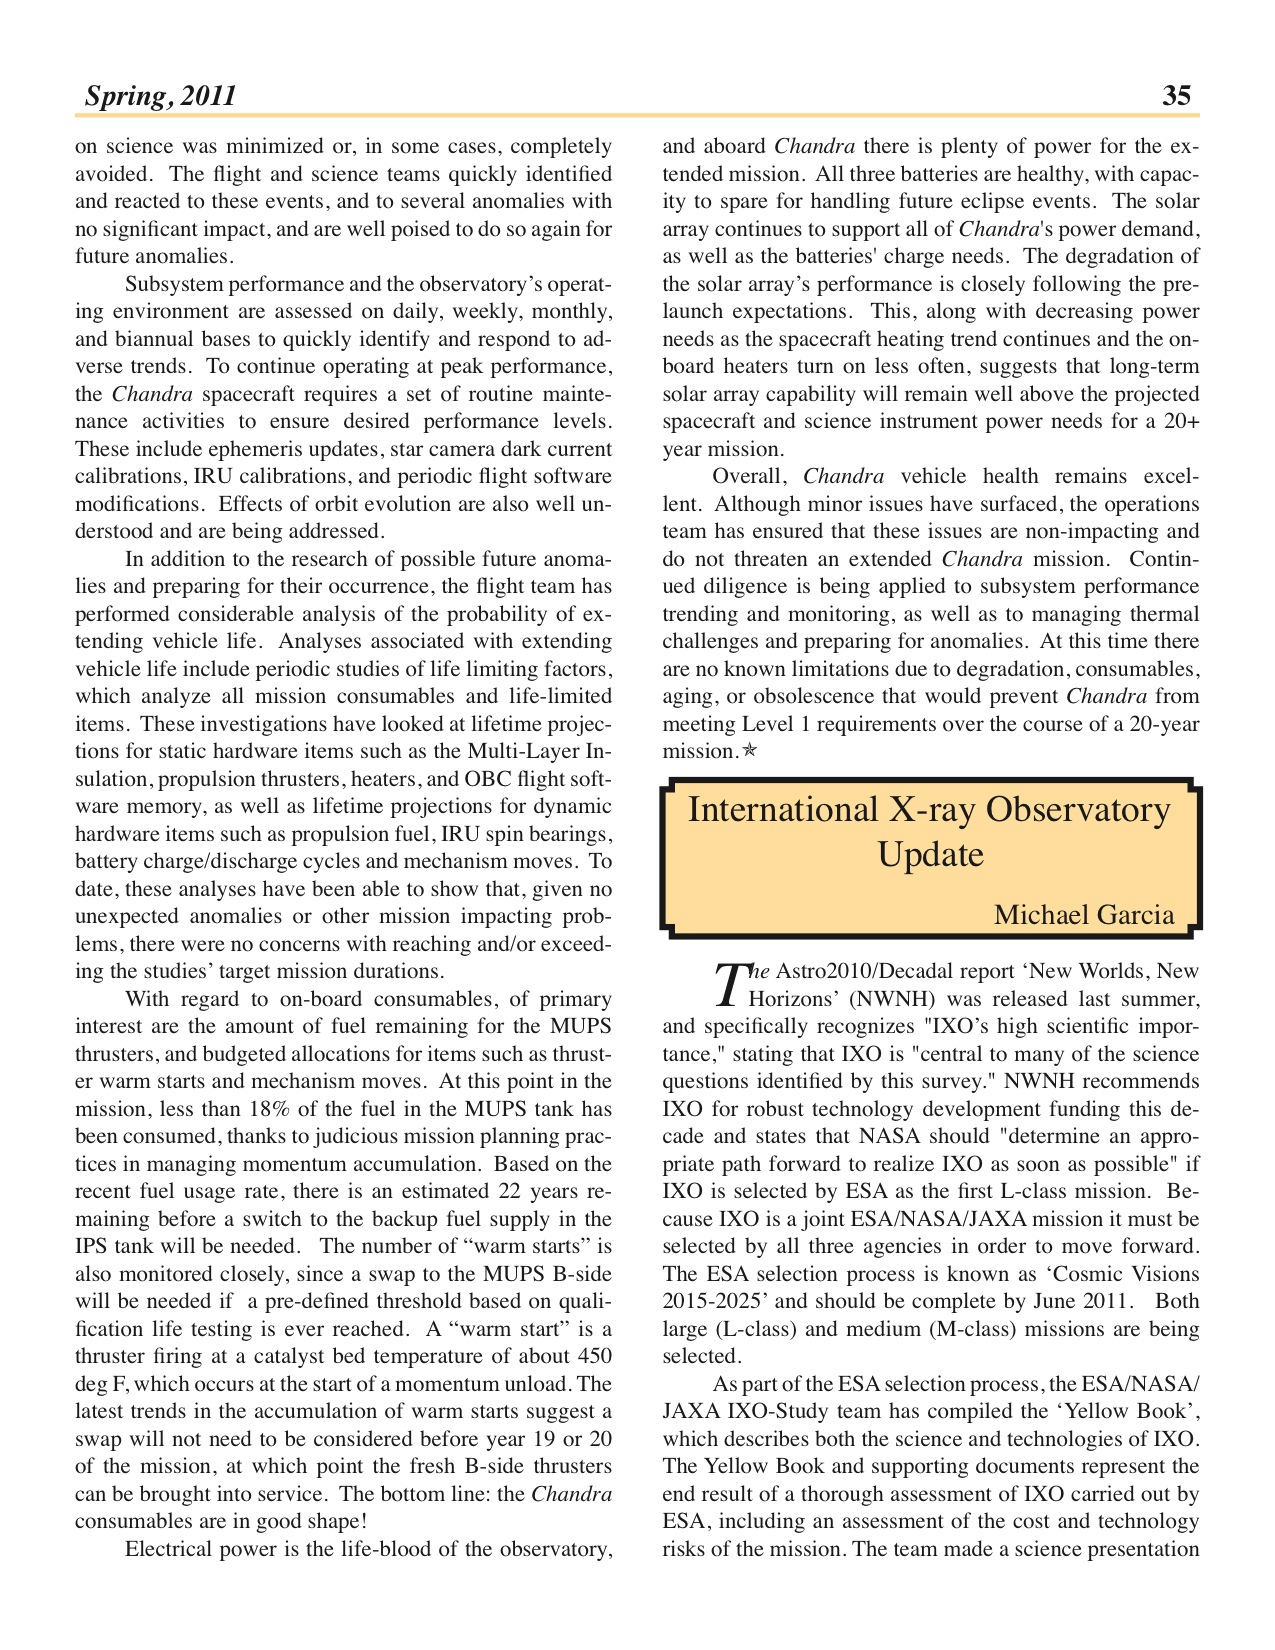 Page 35 of the Chandra Newsletter, issue 18.